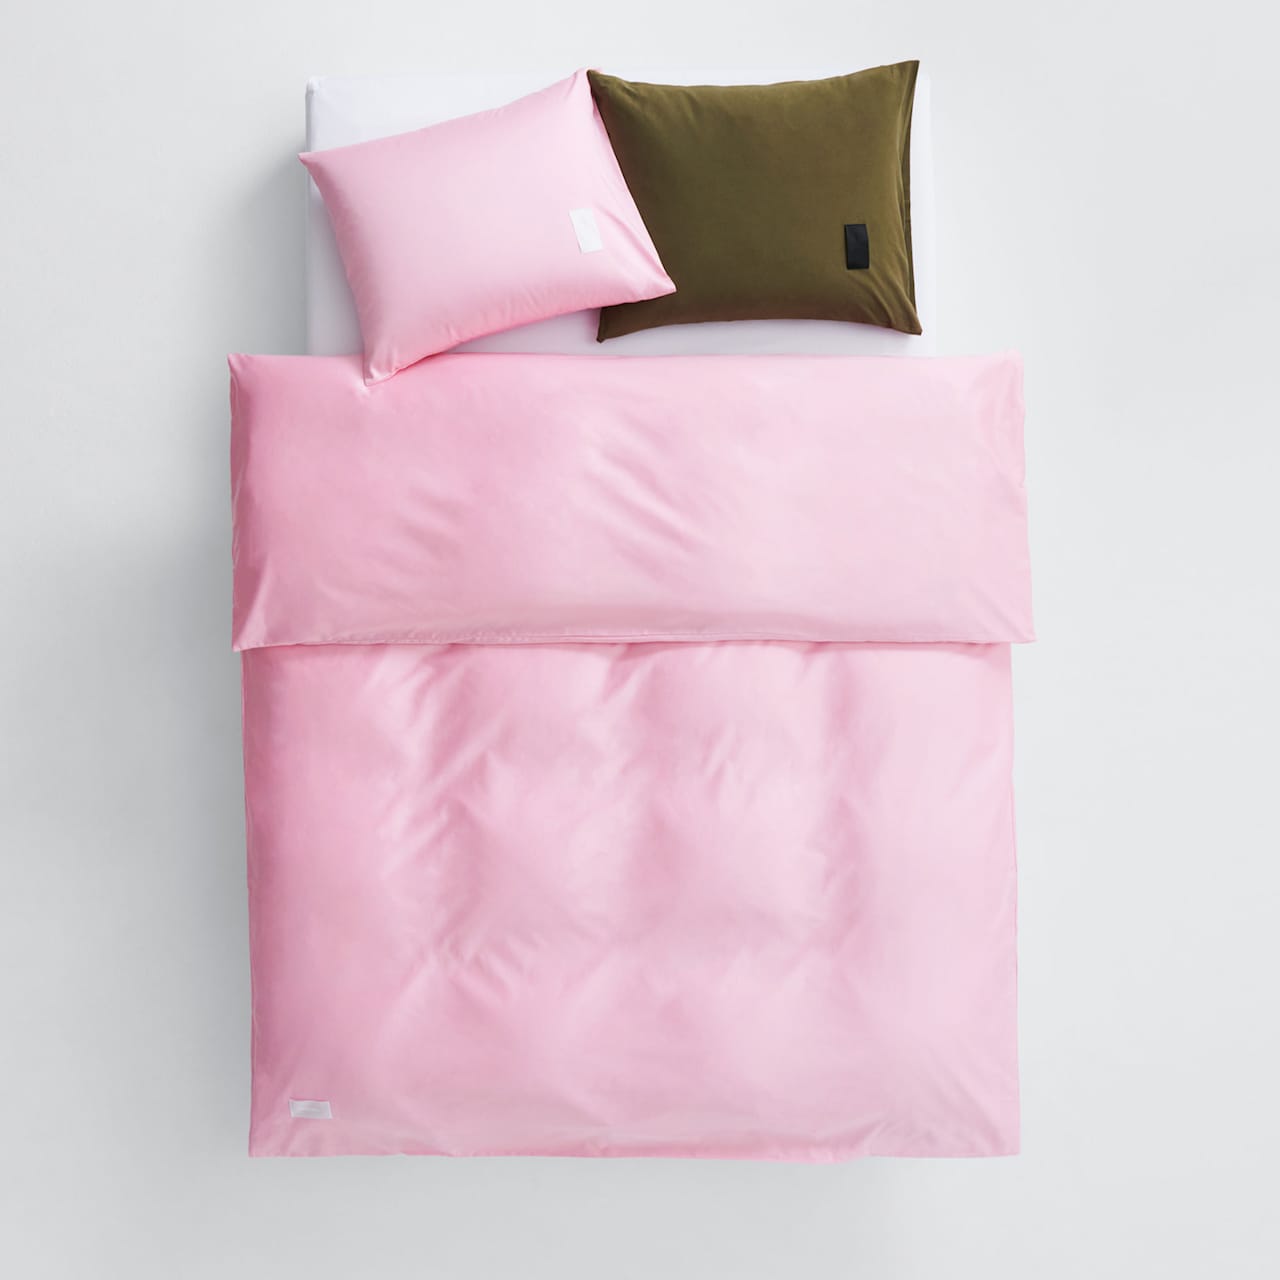 Pure Duvet Cover Sateen - Blossom Pink